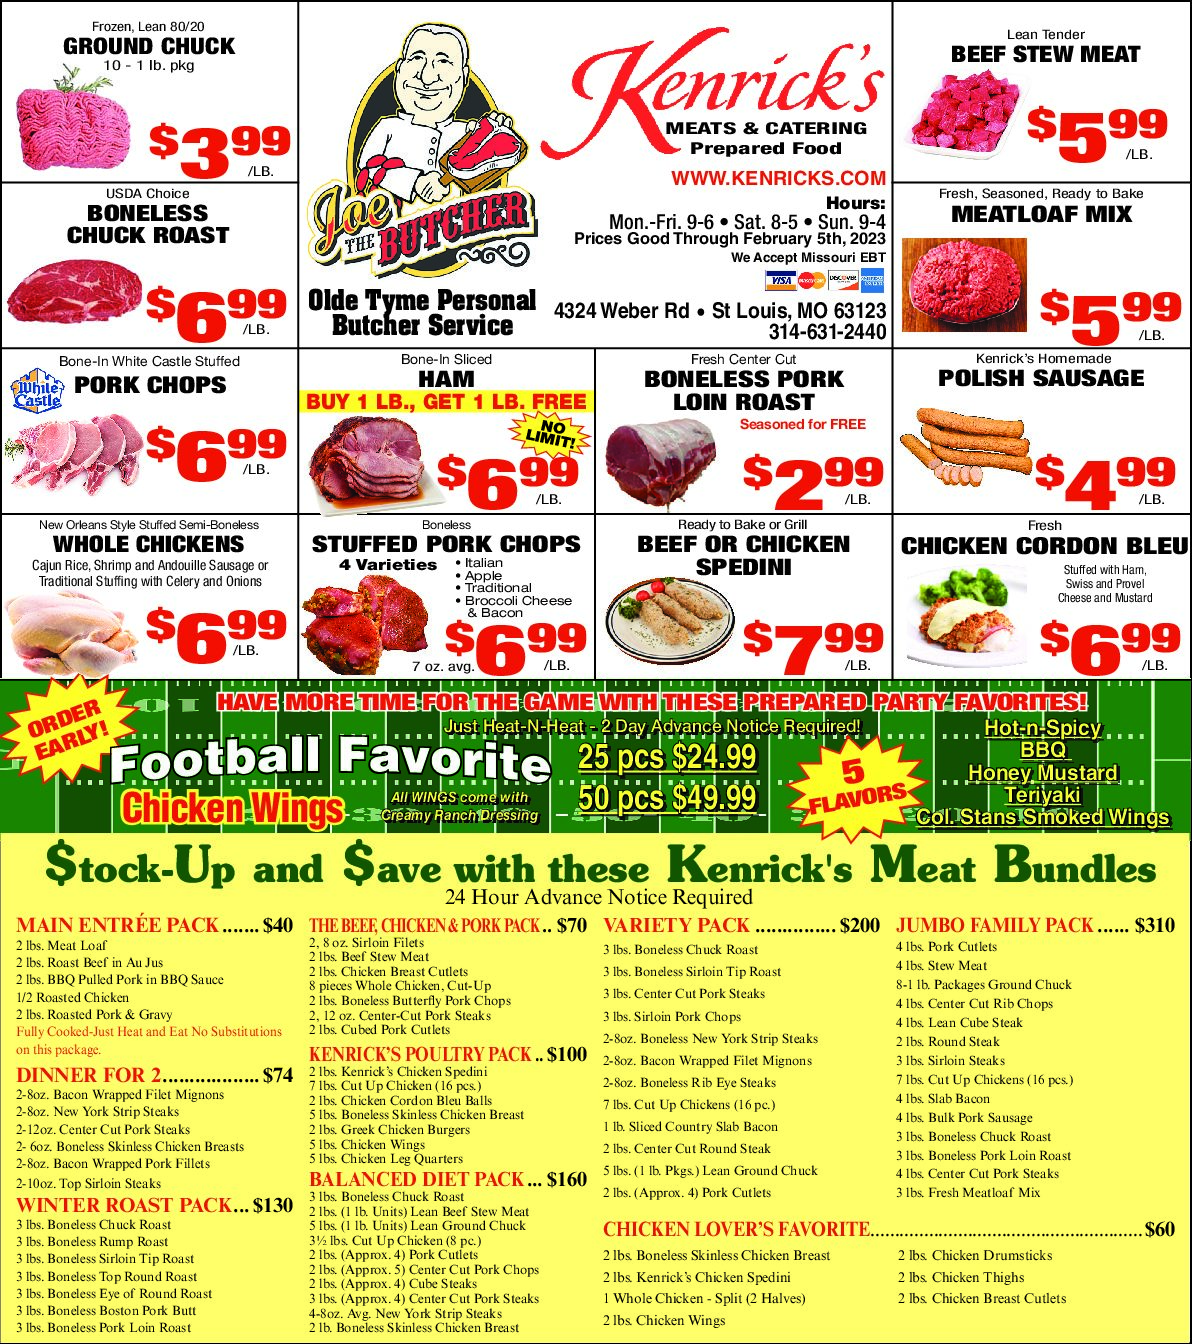 Feb 2 8 Kenricks Meats And Catering 7225